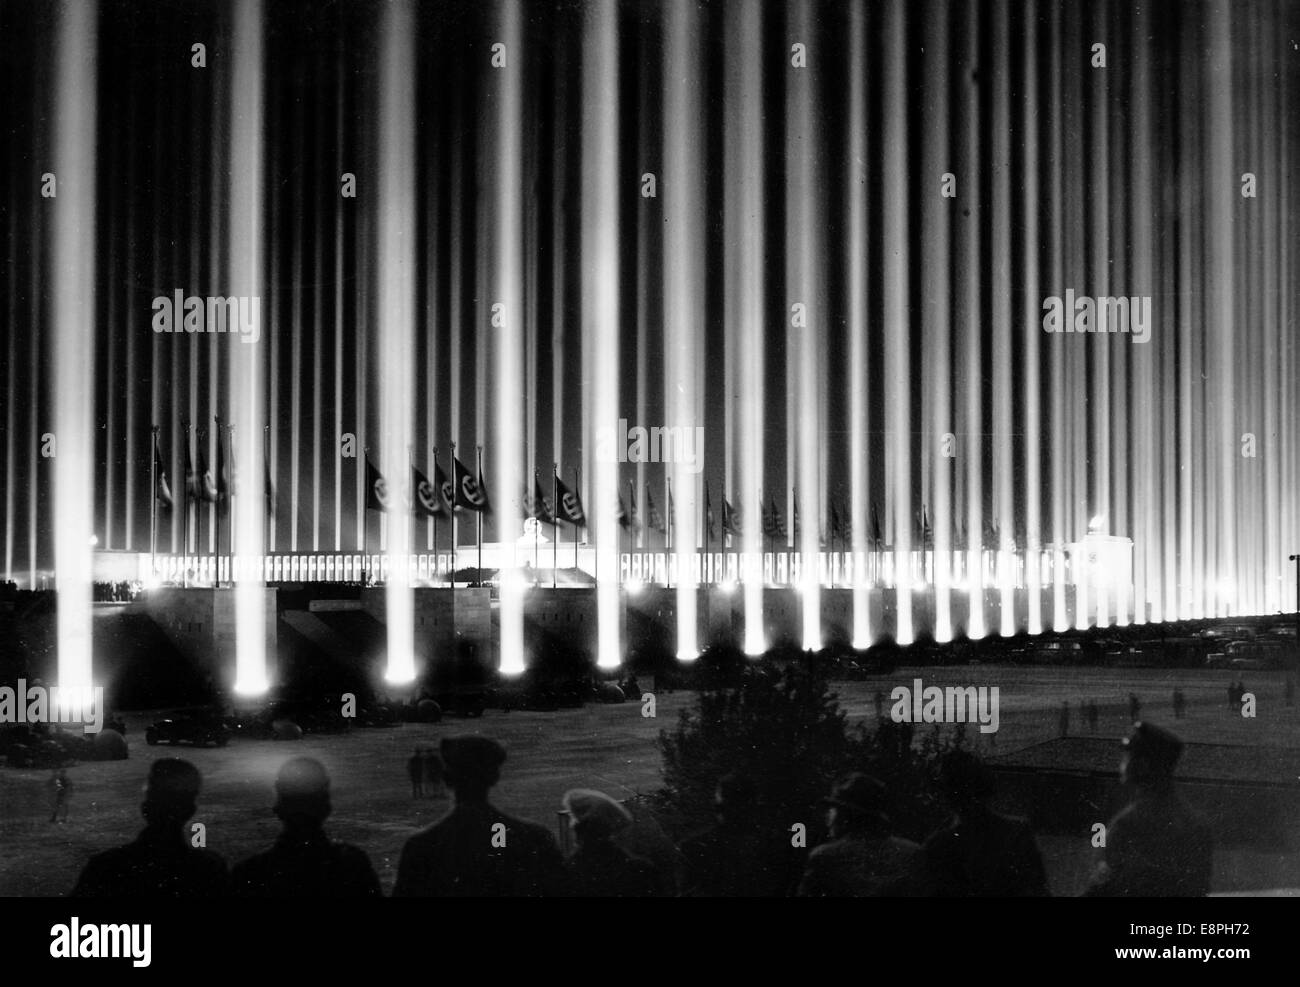 Nuremberg Rally 1937 in Nuremberg, Germany - Hundreds of anti-aircraft searchlights light up the night sky during the roll call of the political leaders of the Nazi party (NSDAP) on Zeppelin Field at the Nazi party rally grounds. (Flaws in quality due to the historic picture copy) Photo: Berliner Verlag/Archive - NO WIRE SERVICE - Stock Photo